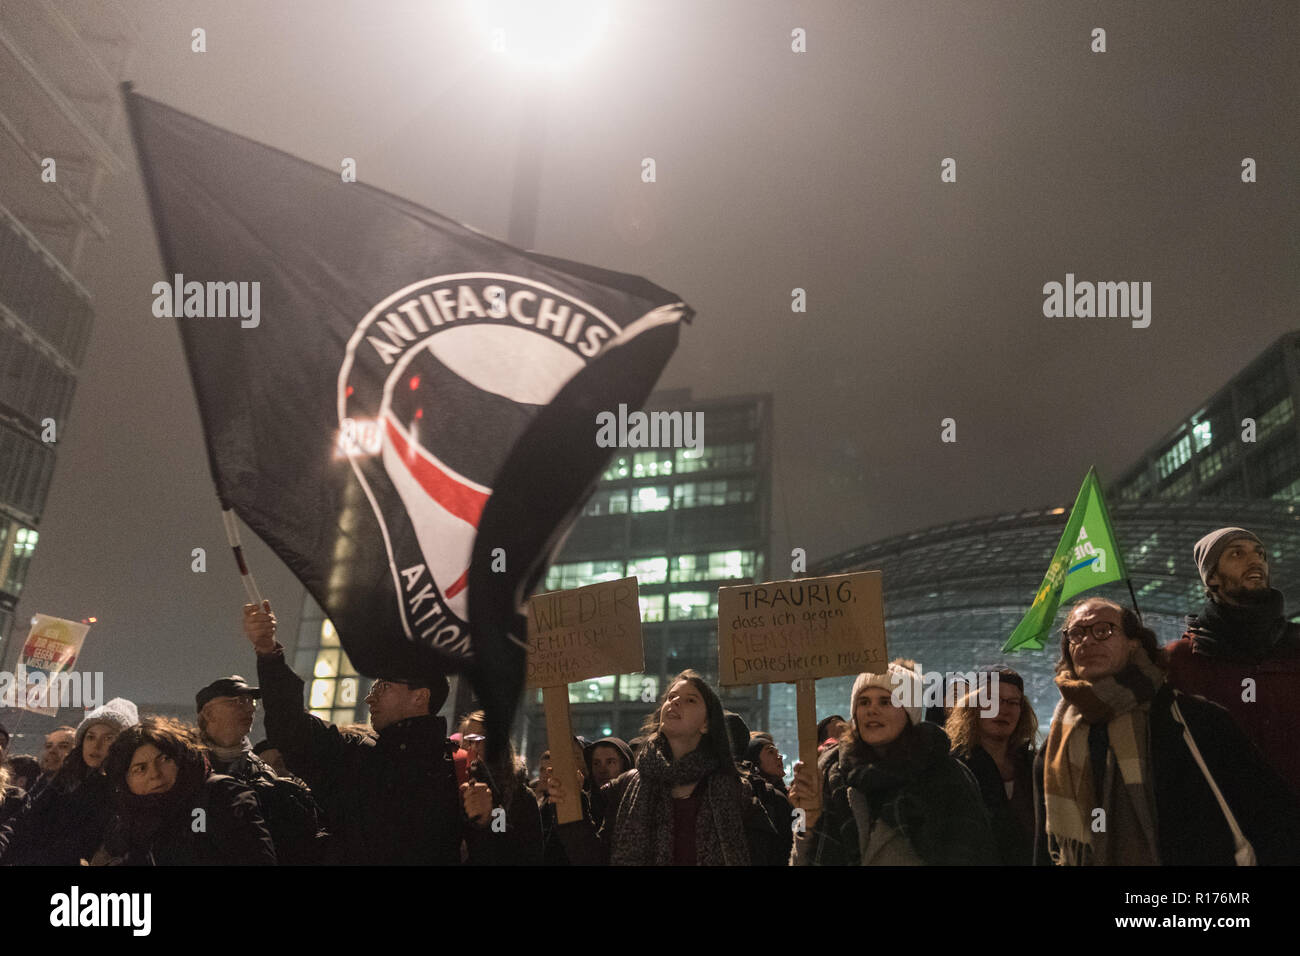 Protesters are seen holding placards and flags during the protest. Hundreds of people have demonstrated against the funeral march of the right-wing extremist organization on the 80th anniversary of the Pogrom Night in 1938 under the motto 'Funeral March for the Dead of Politics'. Stock Photo